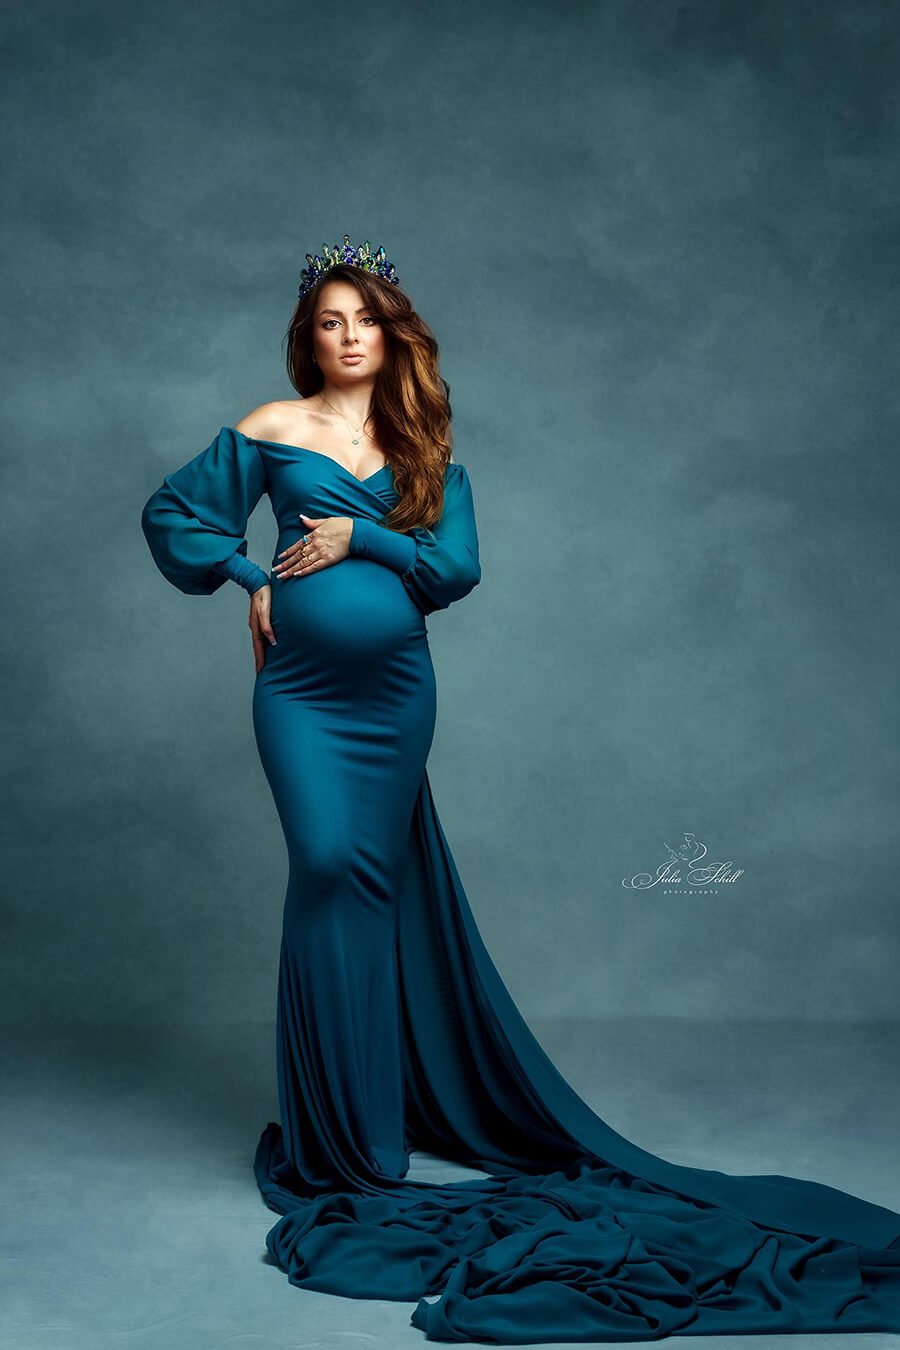 dark blond pregnant woman with long hair poses wearing a petrol colored dress. the dress features a very long chiffon train to create several effects while being photographed. the model looks straight to the camera while holding her baby bump with both hands.